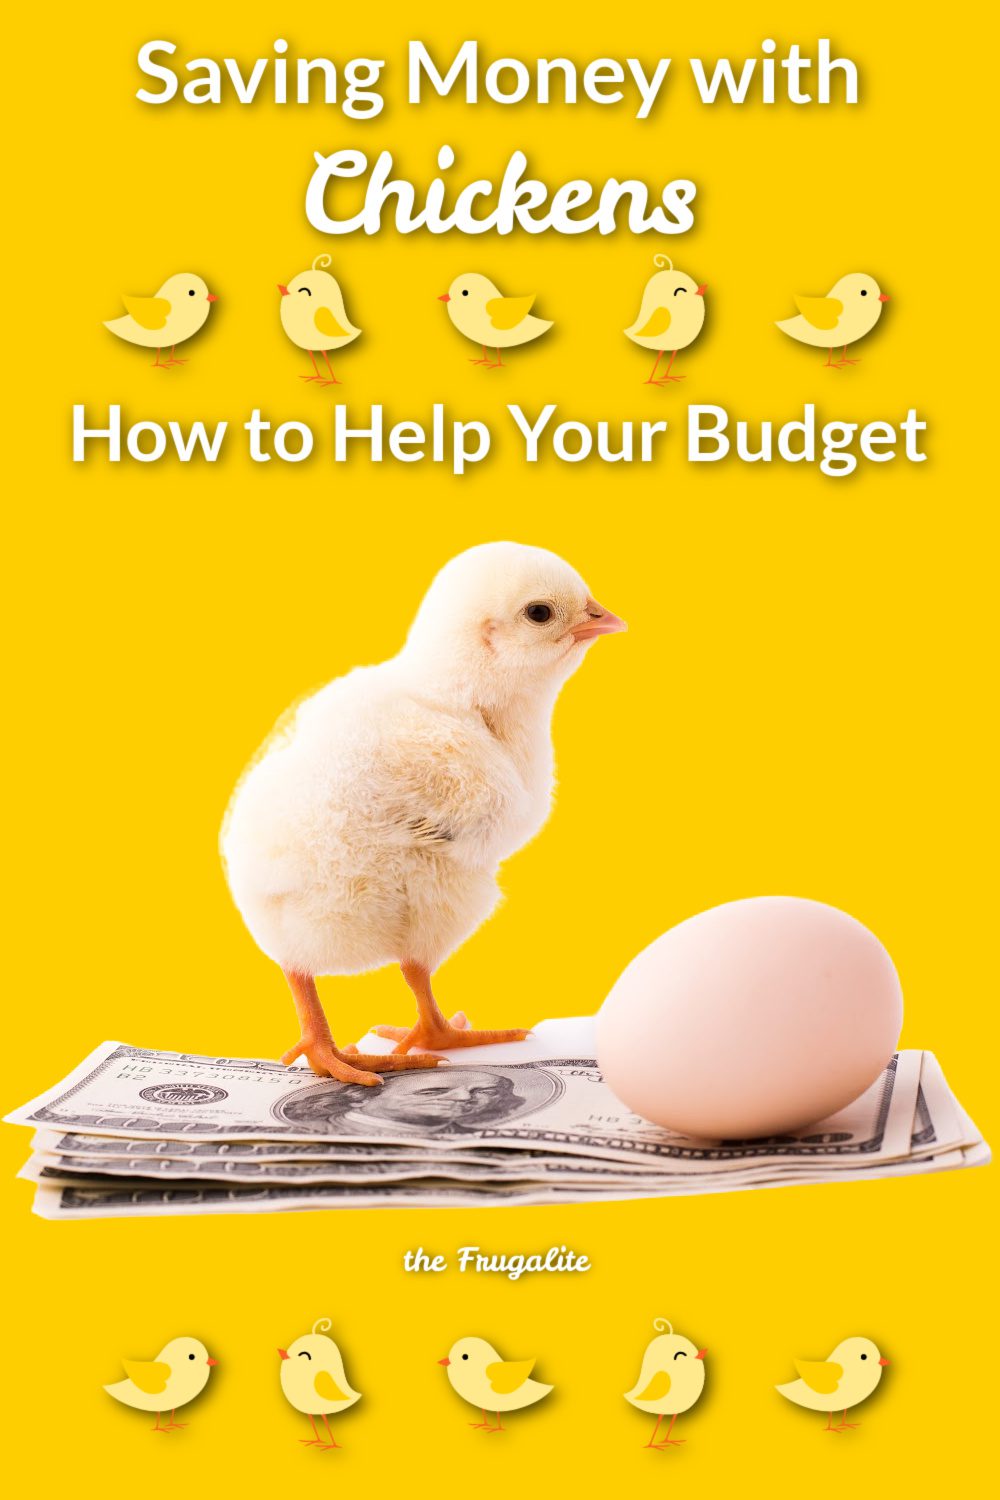 Will Raising Chickens Save You Money?